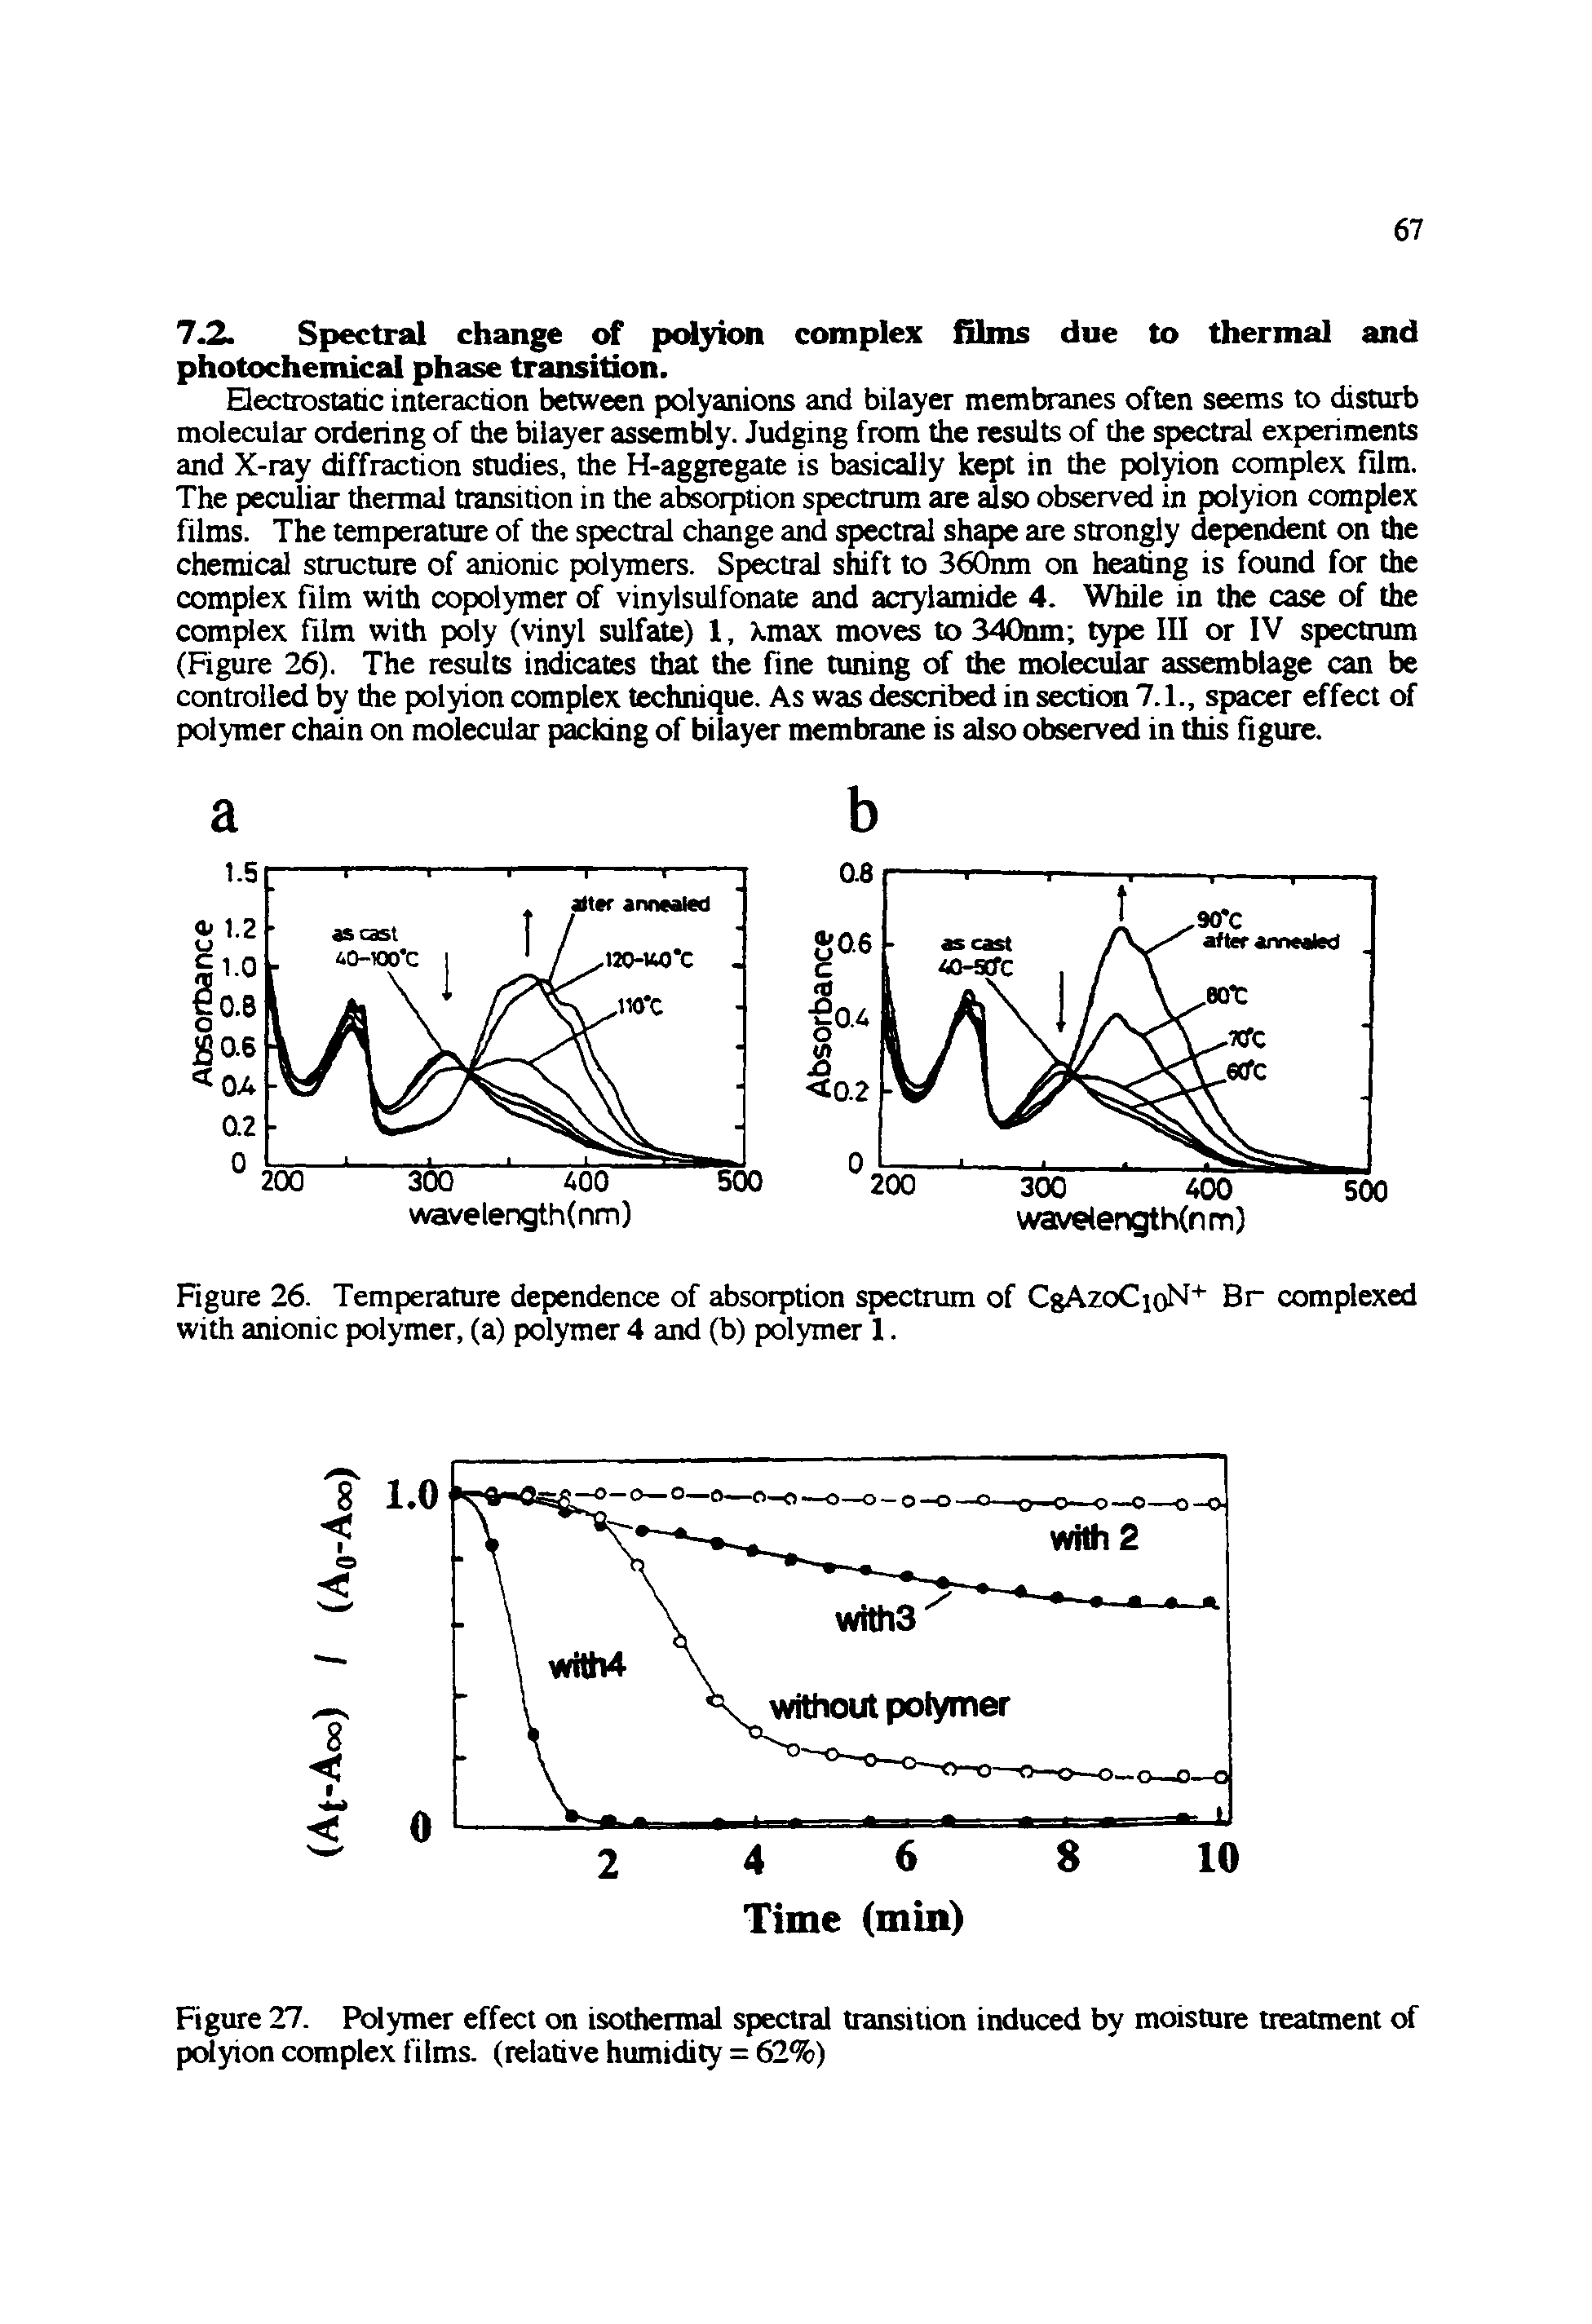 Figure 27. Polymer effect on isothermal spectral transition induced by moisture treatment of polyion complex films, (relative humidity = 62%)...